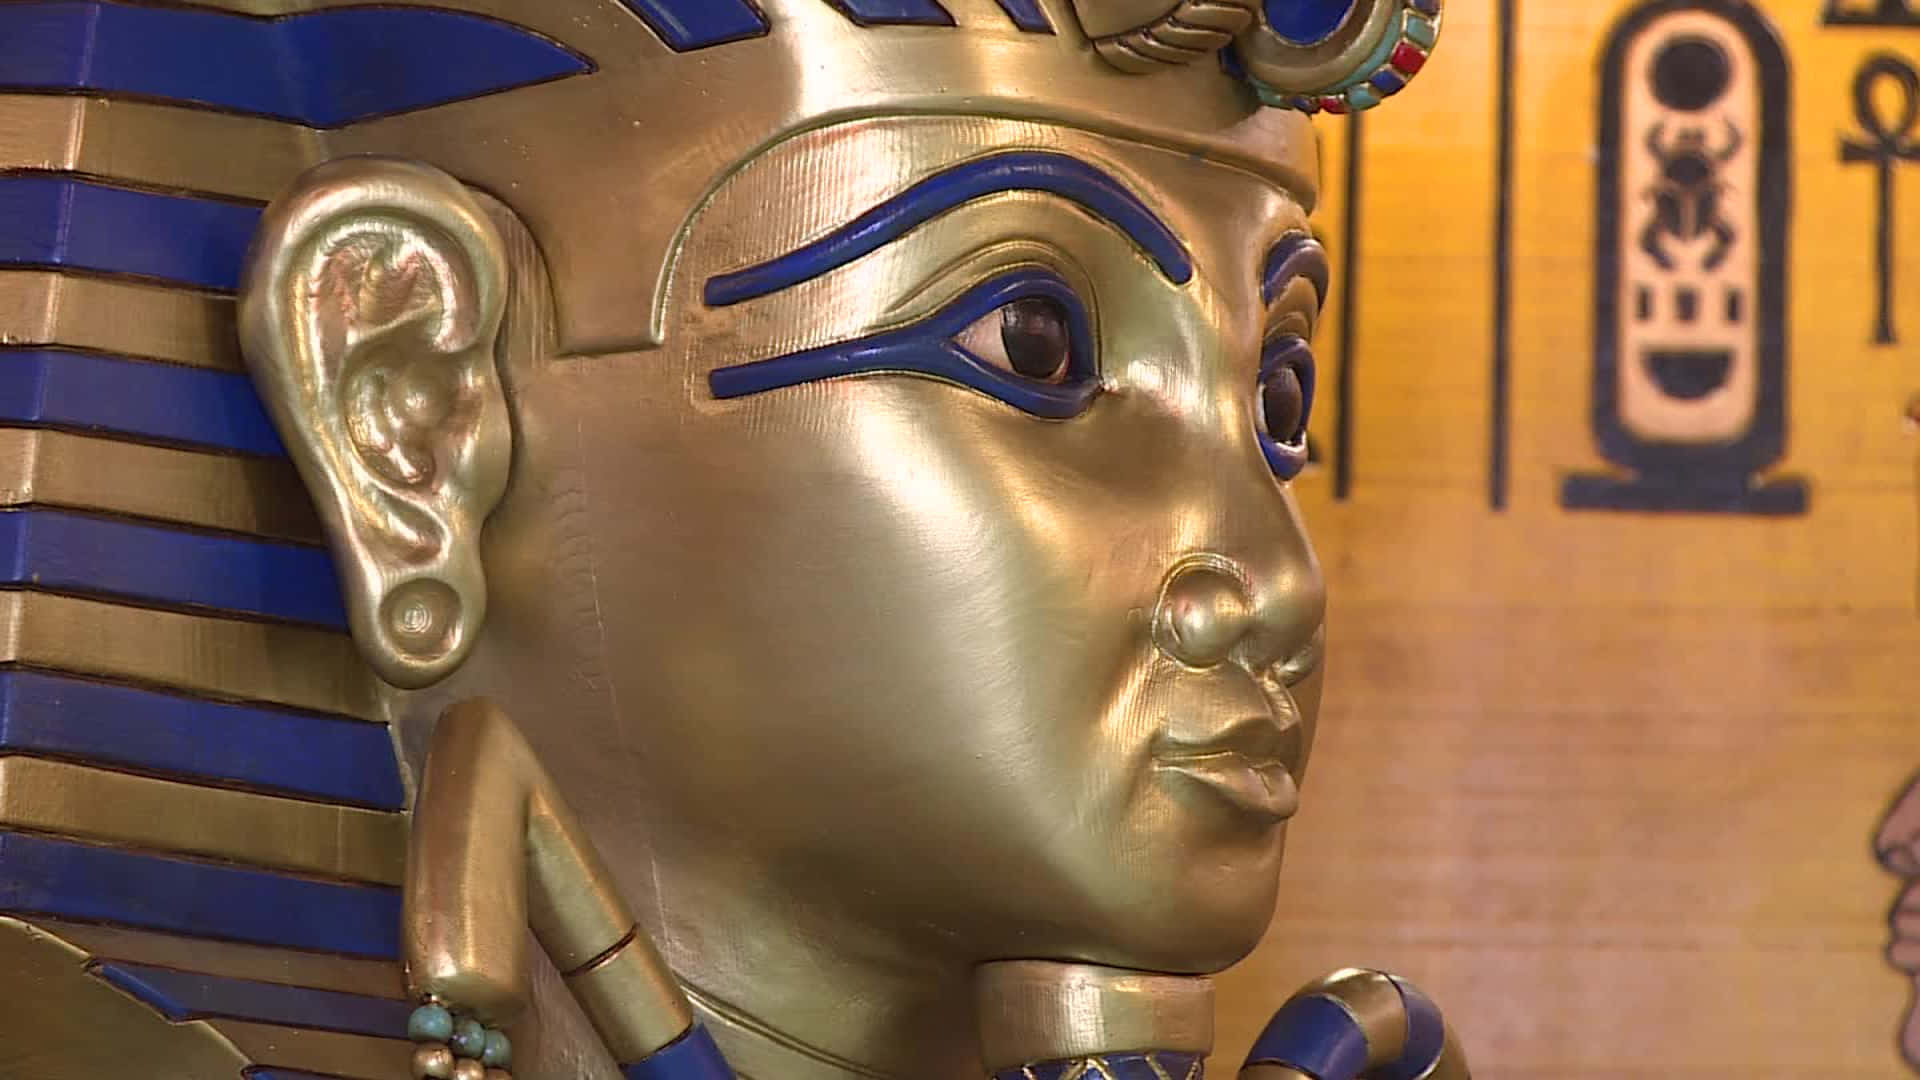 A Statue Of An Egyptian Pharaoh With Gold And Blue Eyes